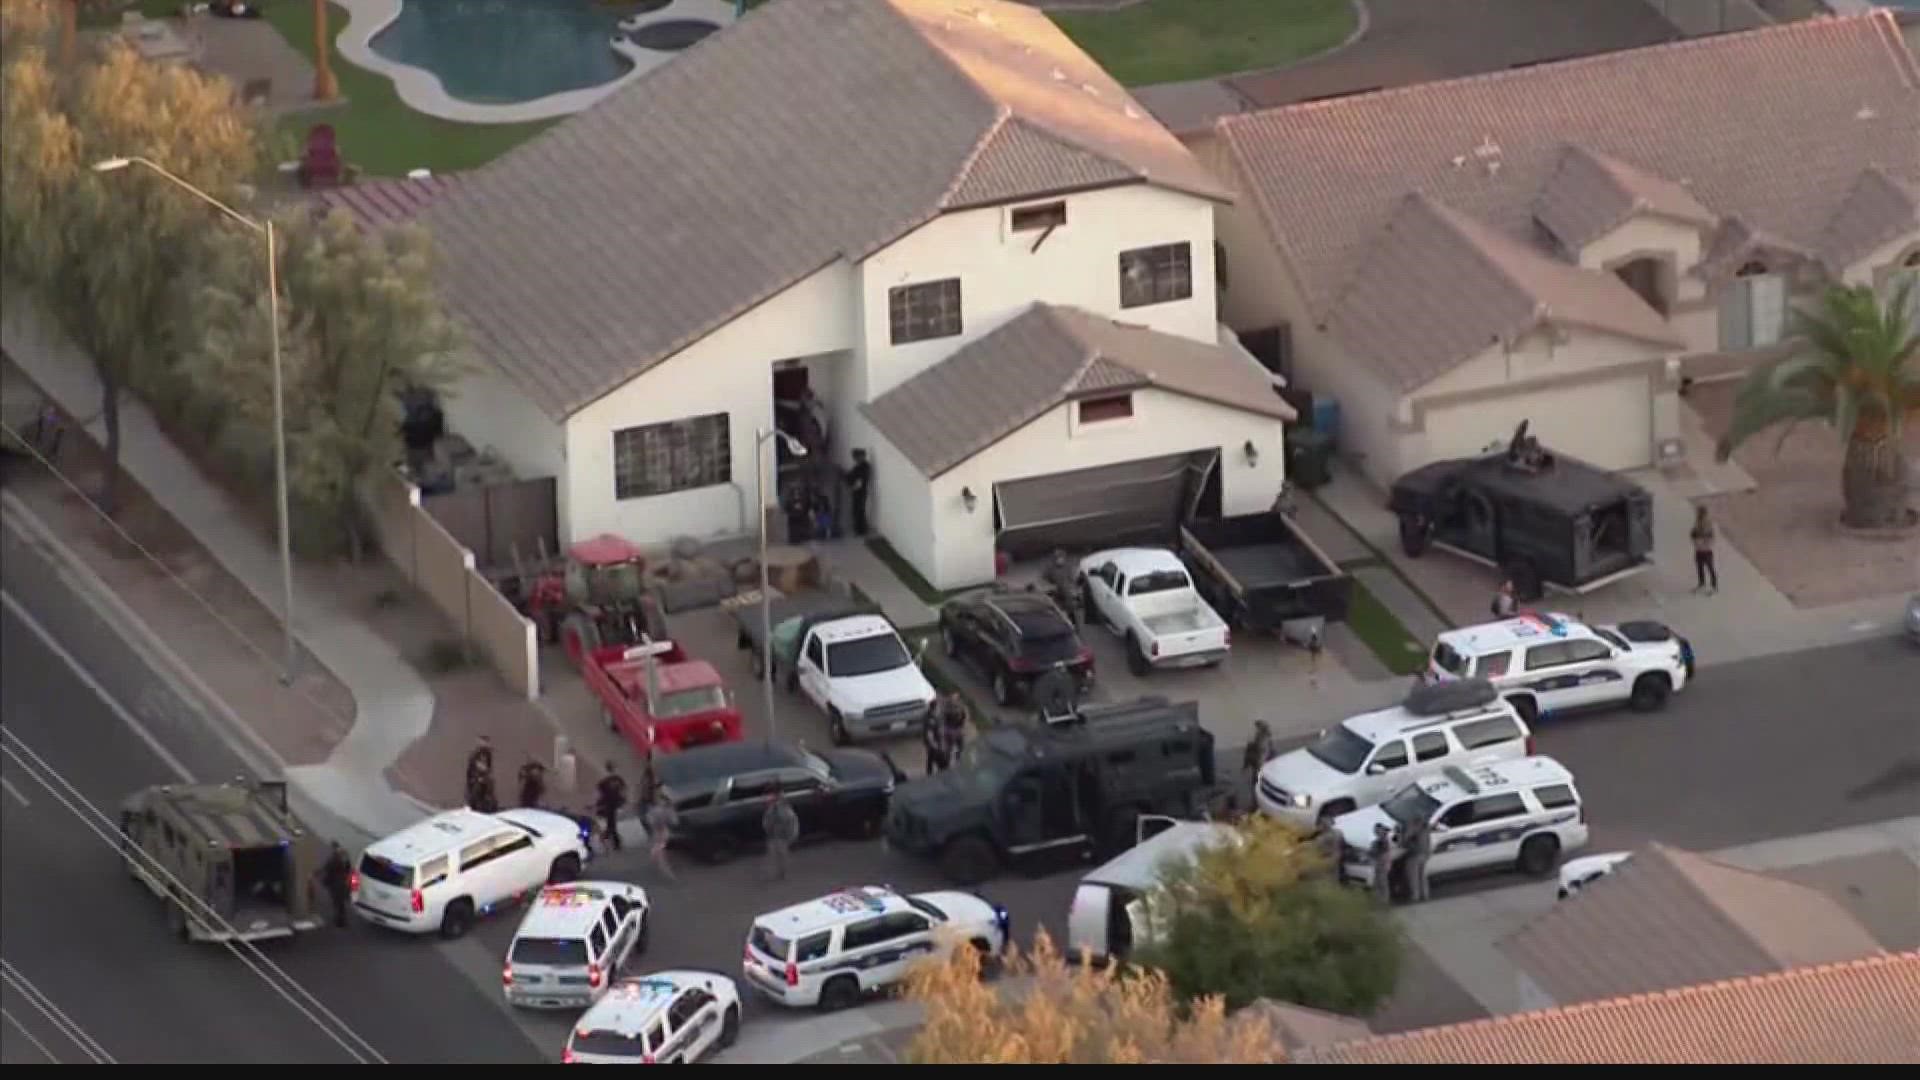 Phoenix police swarm a home in the north Valley after a man opens fire on officers.